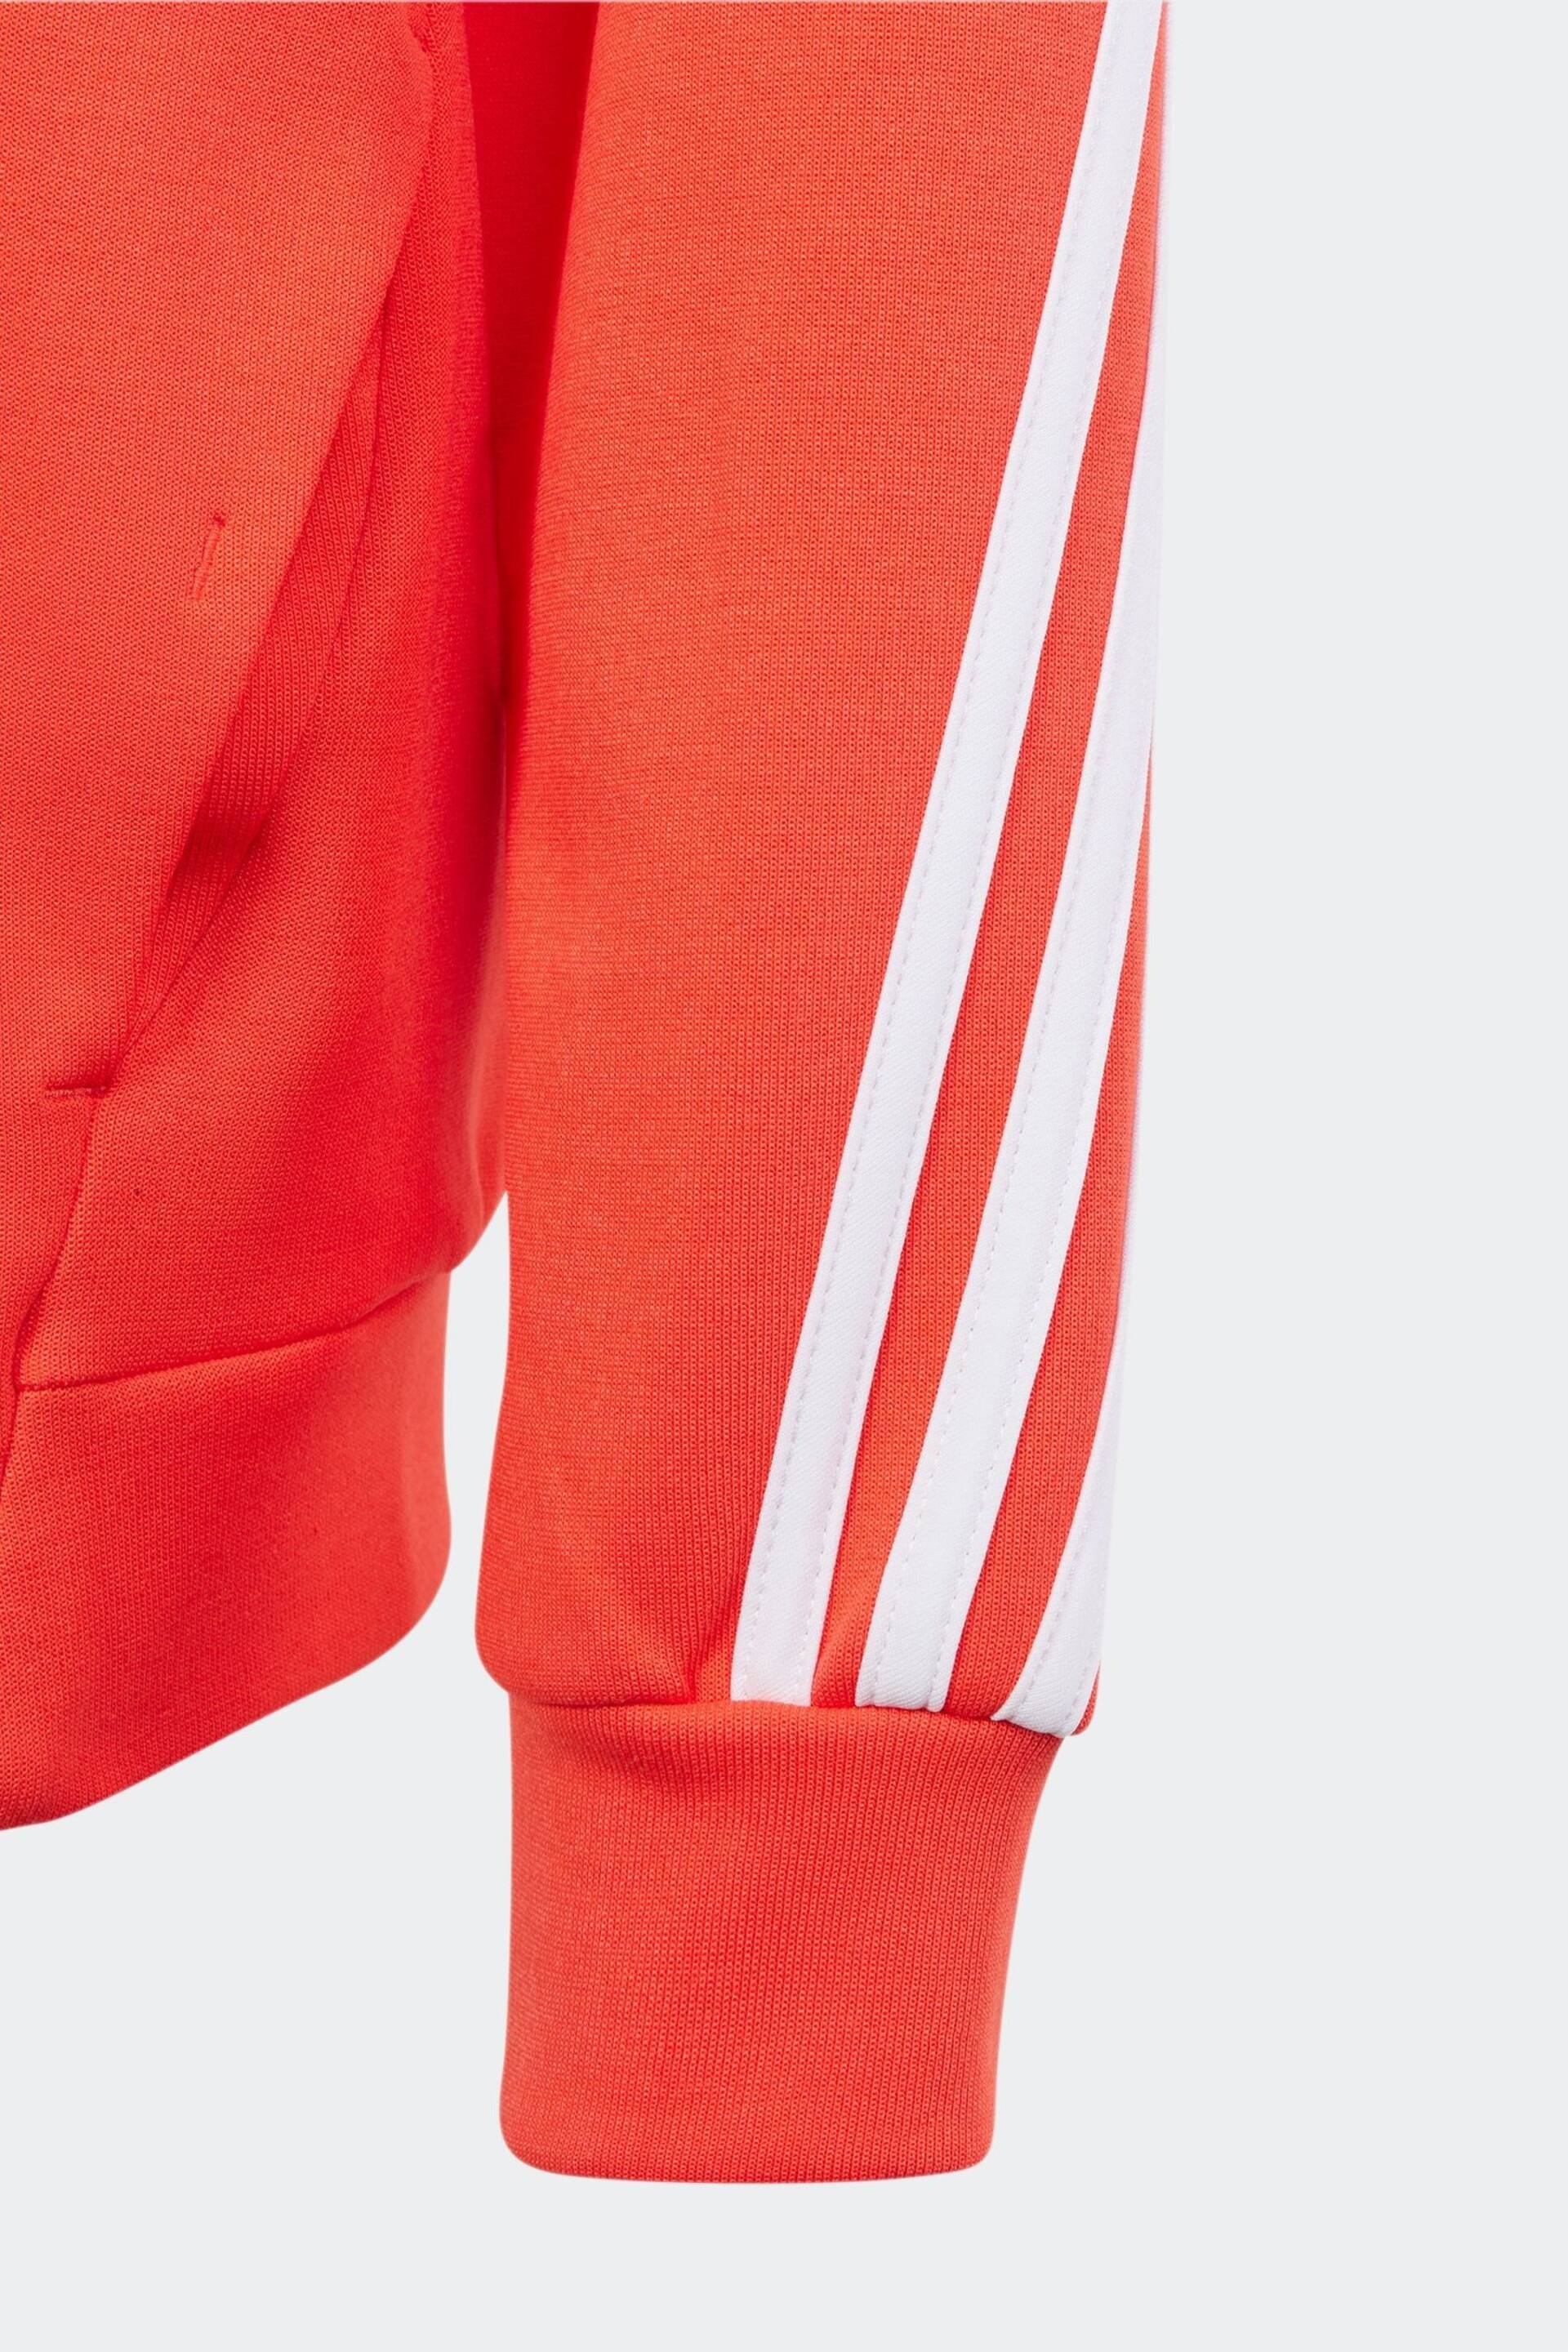 adidas Red Sportswear Future Icons 3-Stripes Full-Zip Hooded Track Top - Image 5 of 5